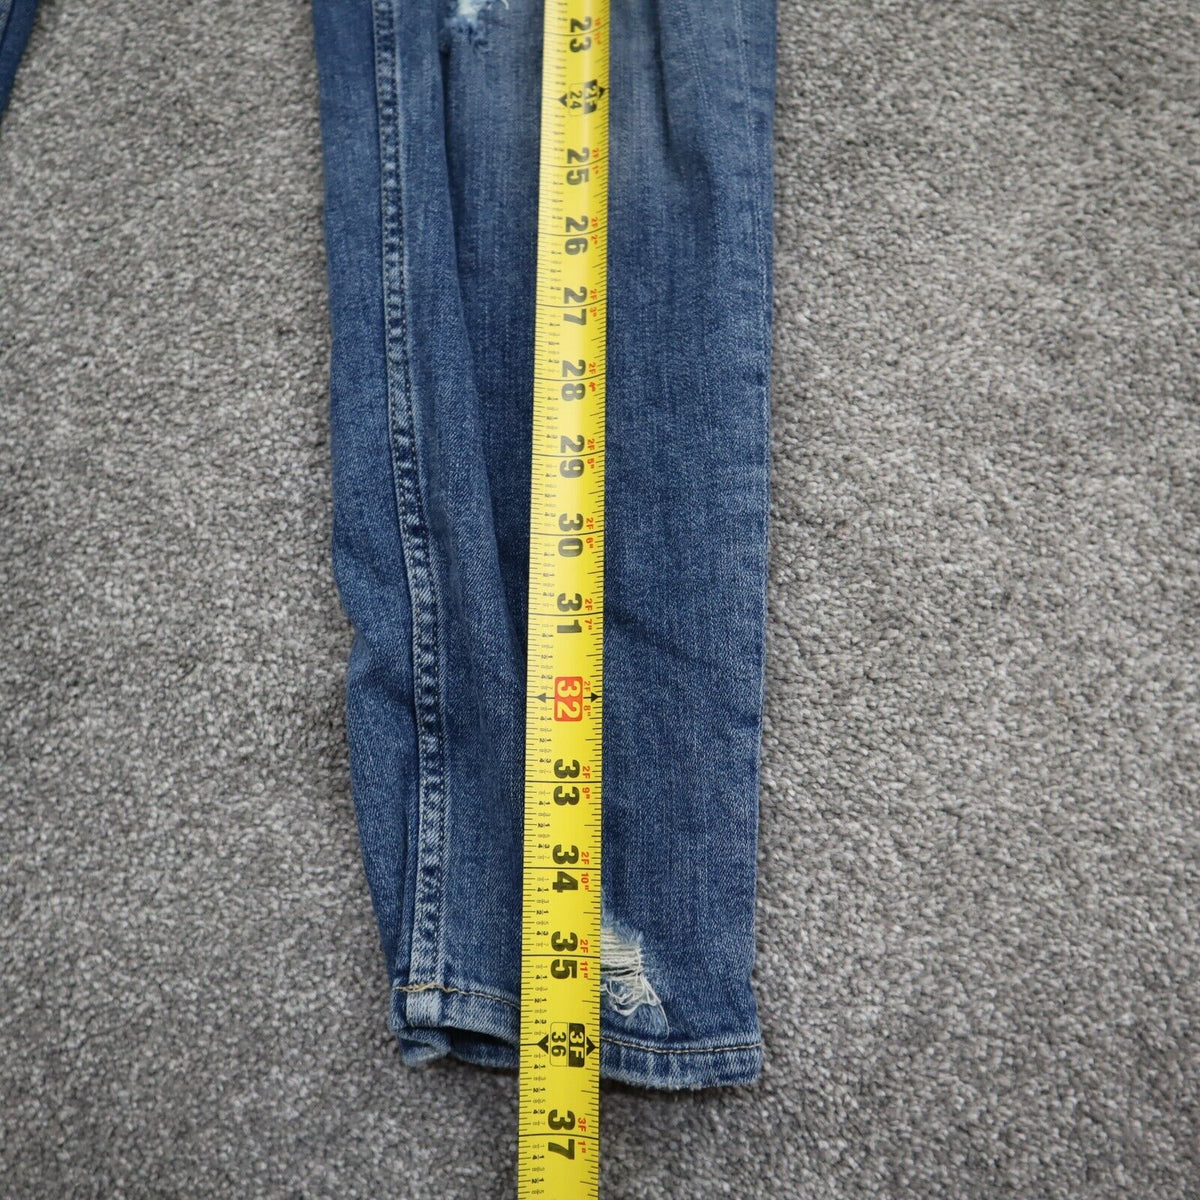 H&M Jeans Womens Size 6 Blue Skinny Divided Distressed High Rise